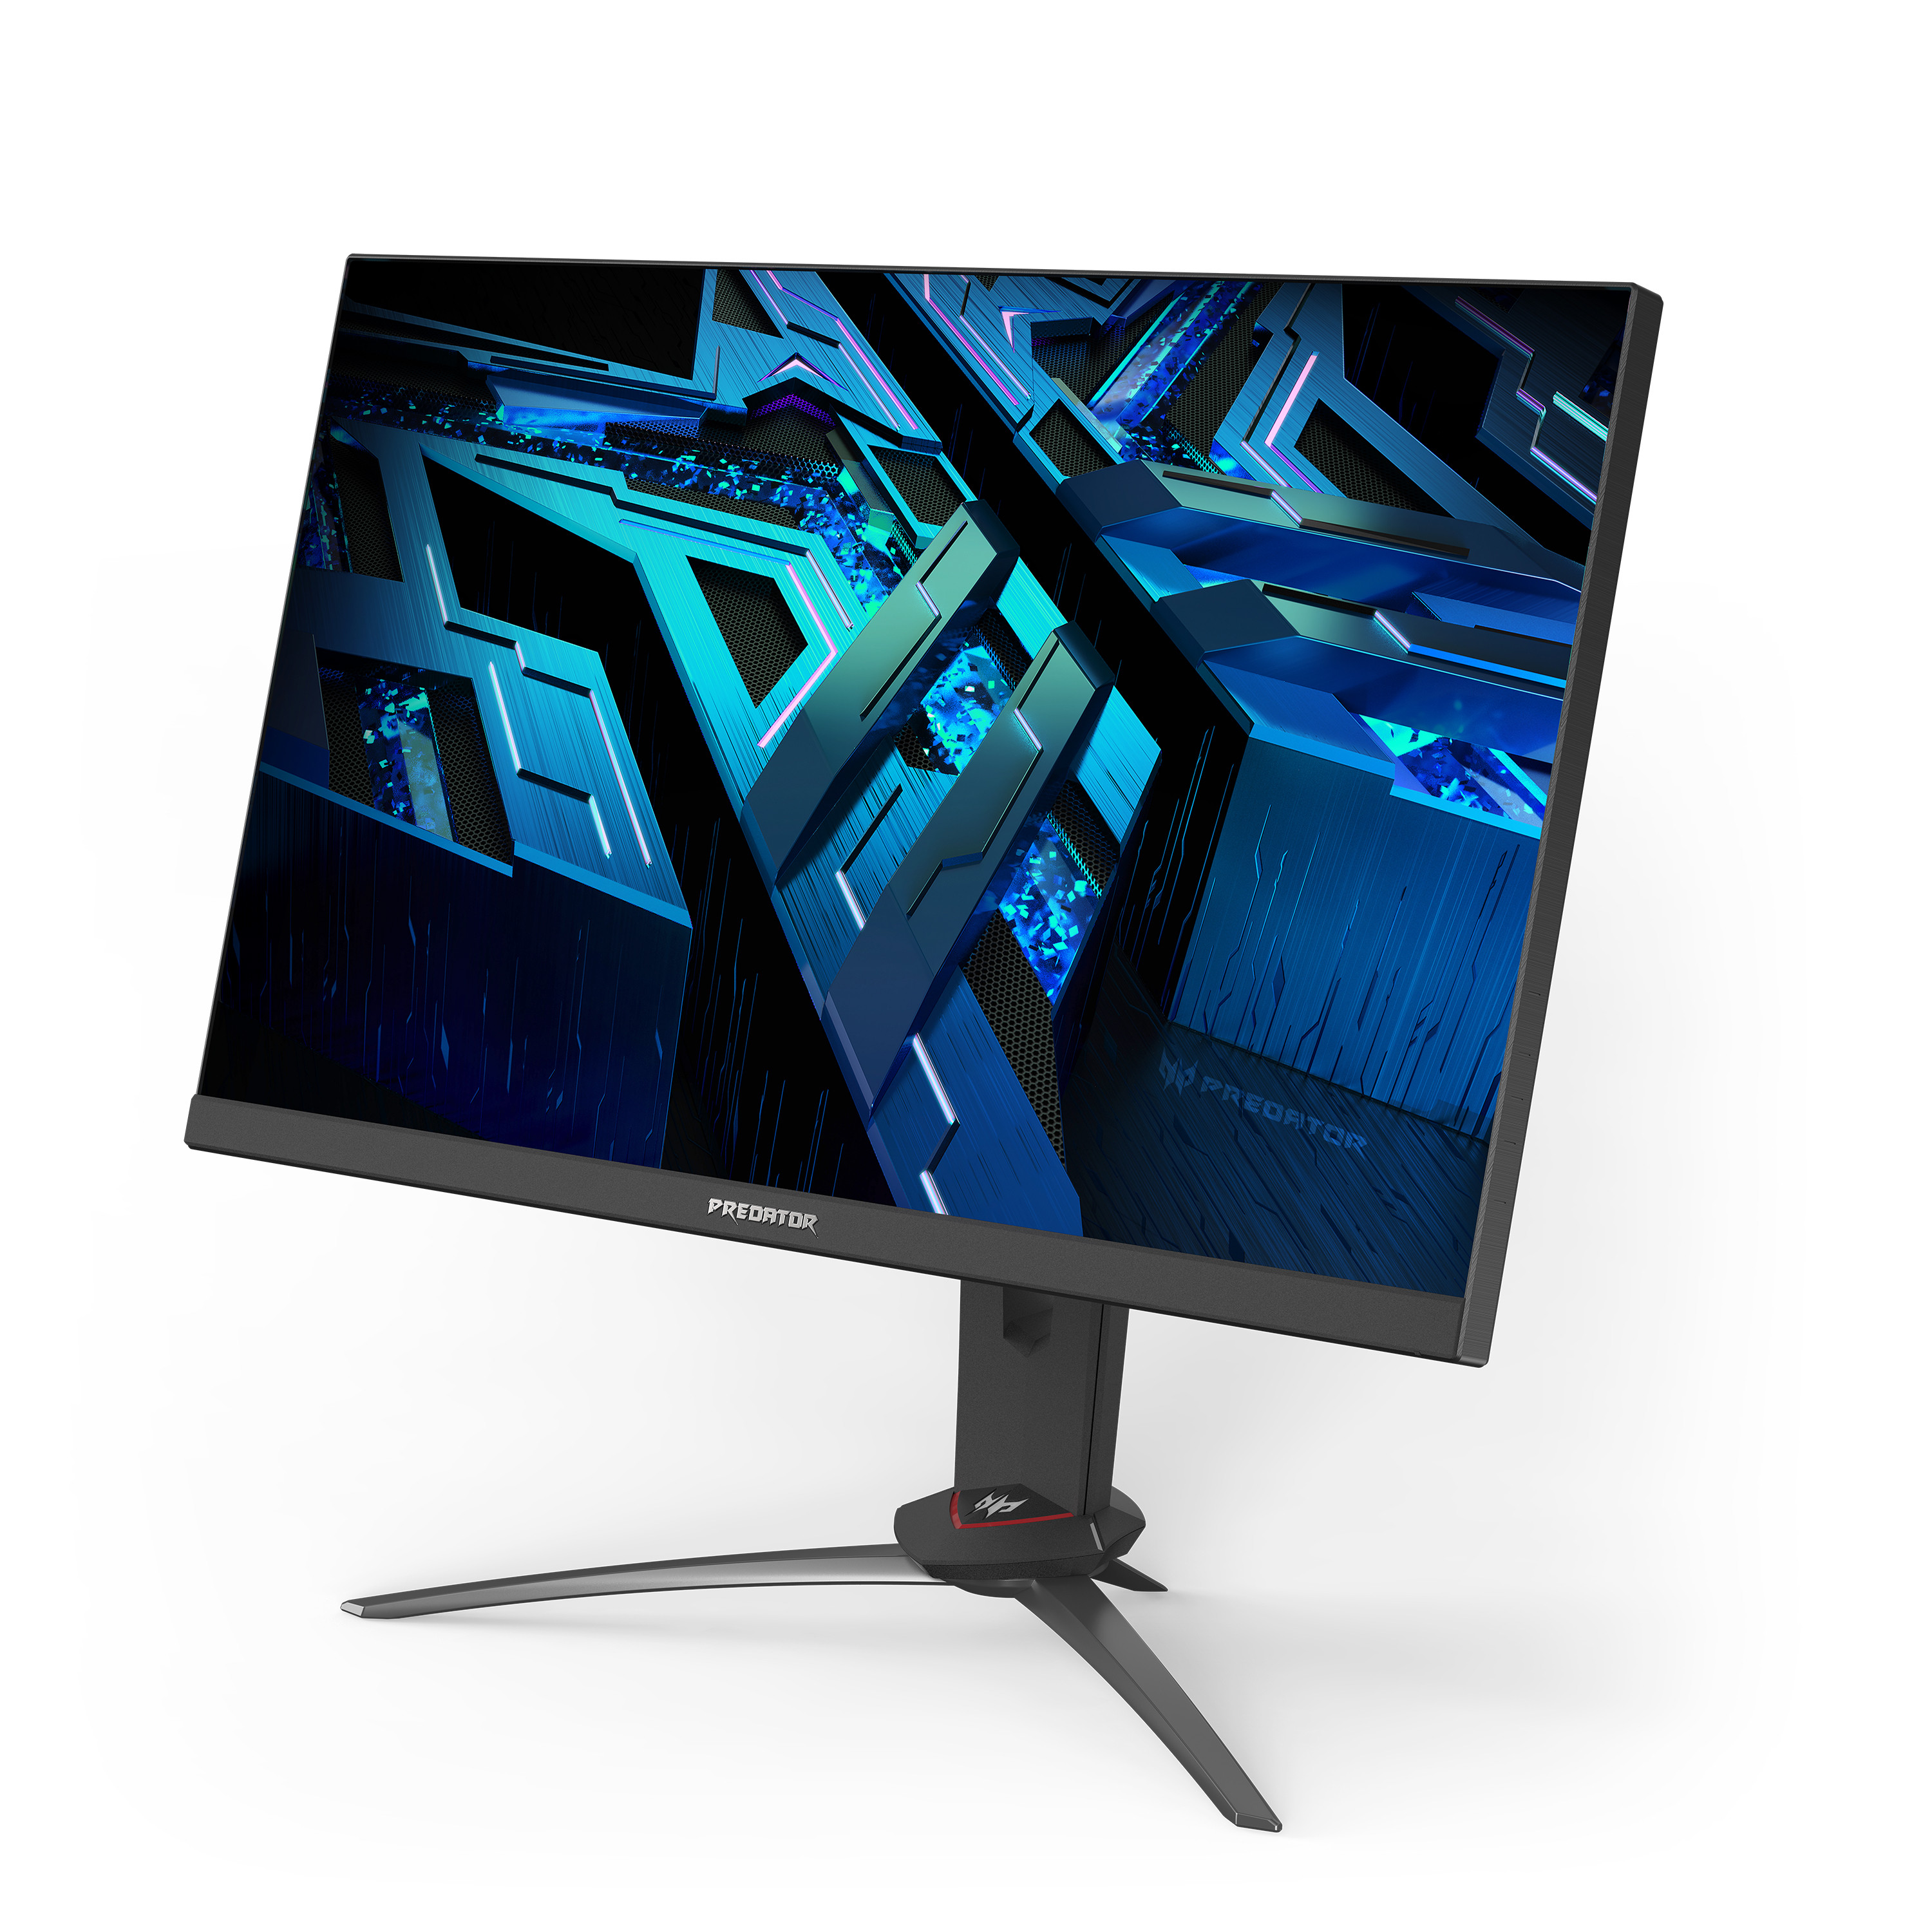 midt i intetsteds Reparation mulig prangende Acer Predator XB273K LV: 4K 160 Hz gaming monitor announced with HDMI 2.1  ports and an in-built KVM switch - NotebookCheck.net News